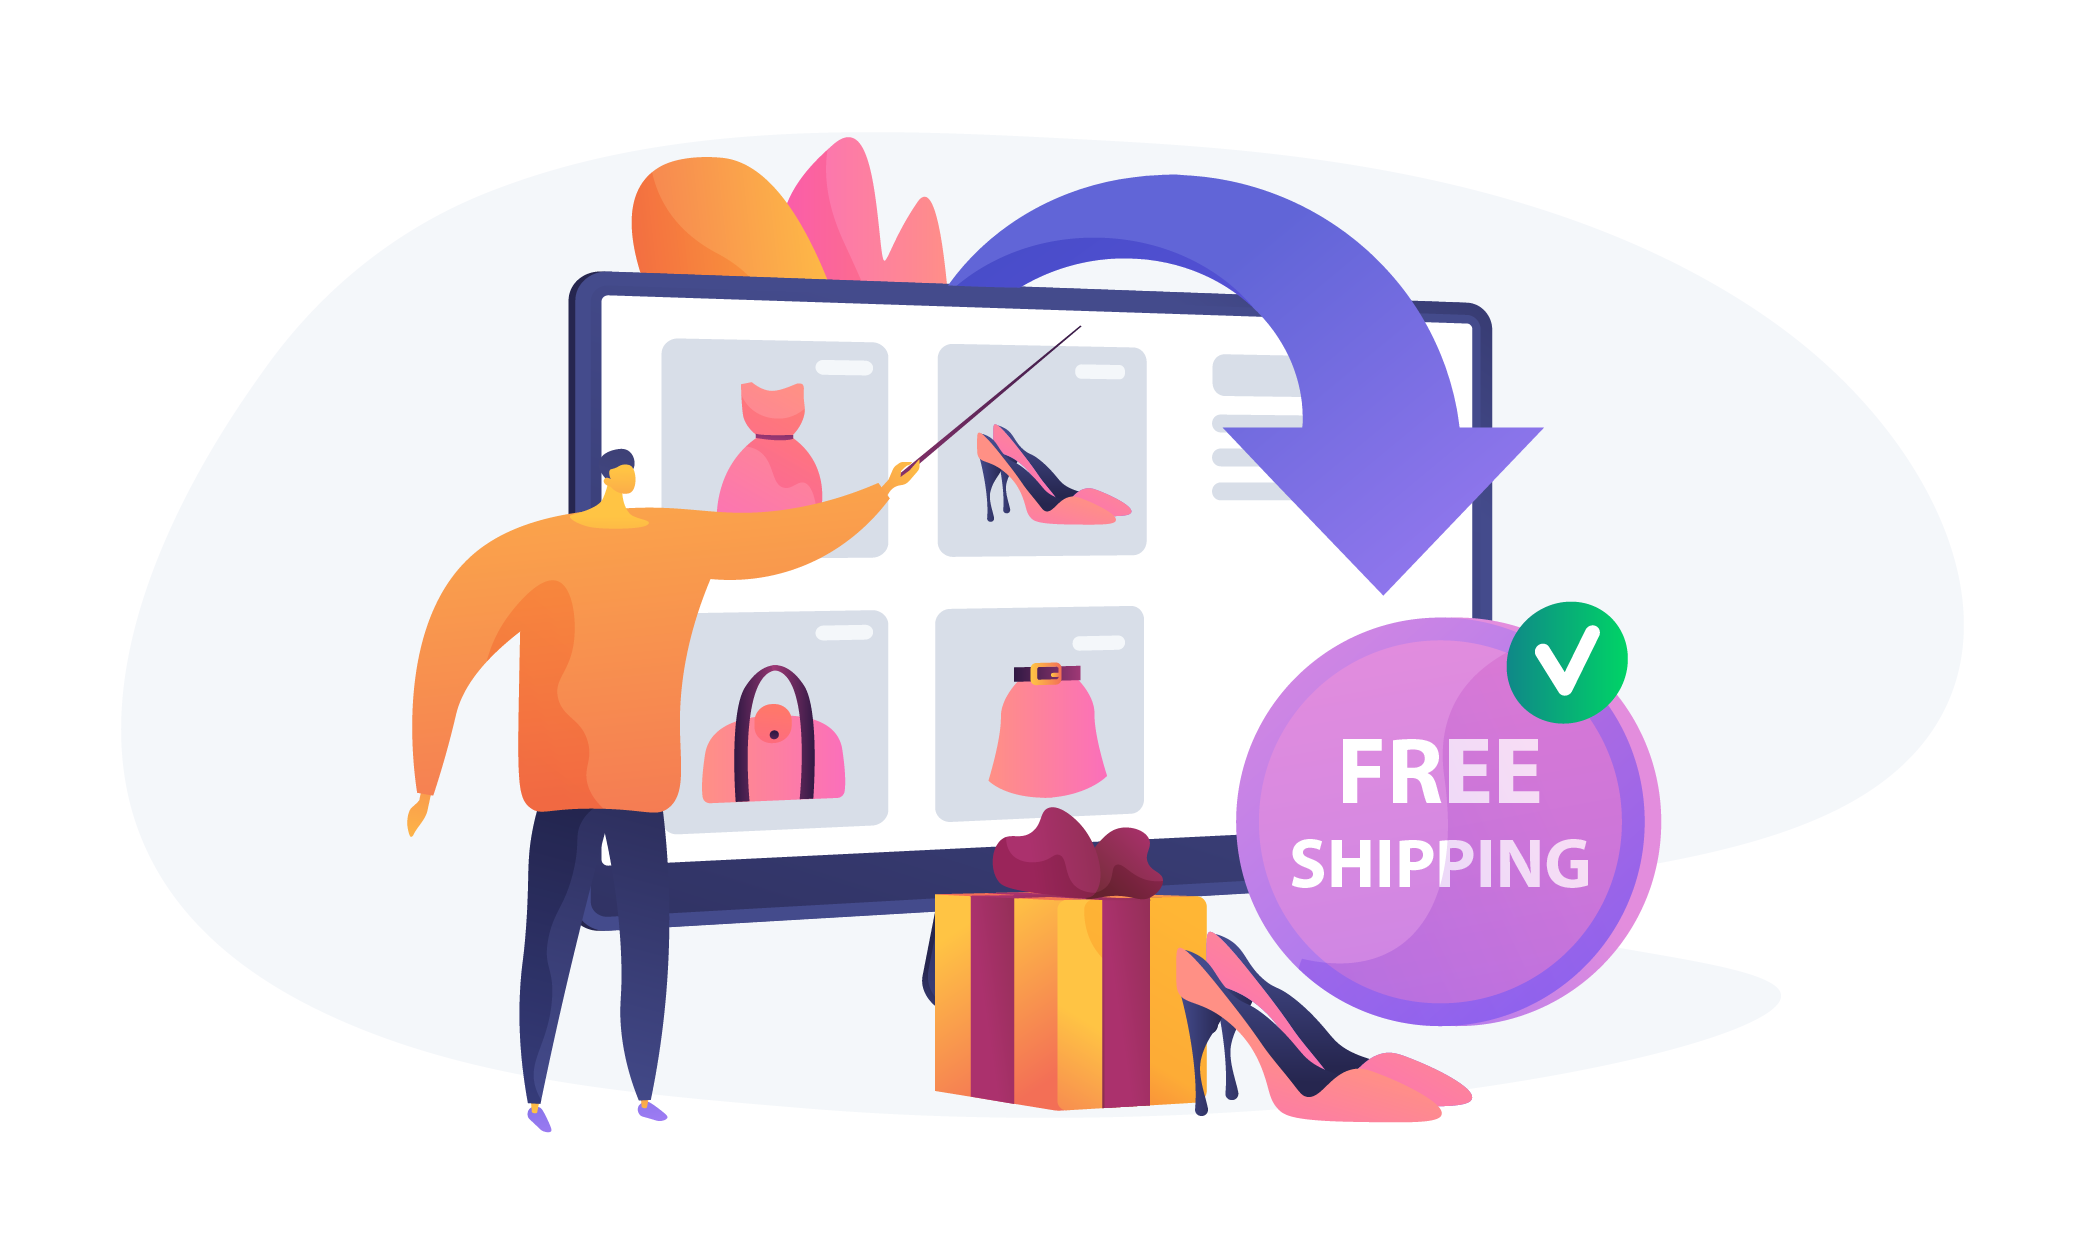 https://shippingchimp.com/blog/wp-content/uploads/2022/05/5-Best-Ways-to-Offer-Free-Shipping-for-Your-01.png